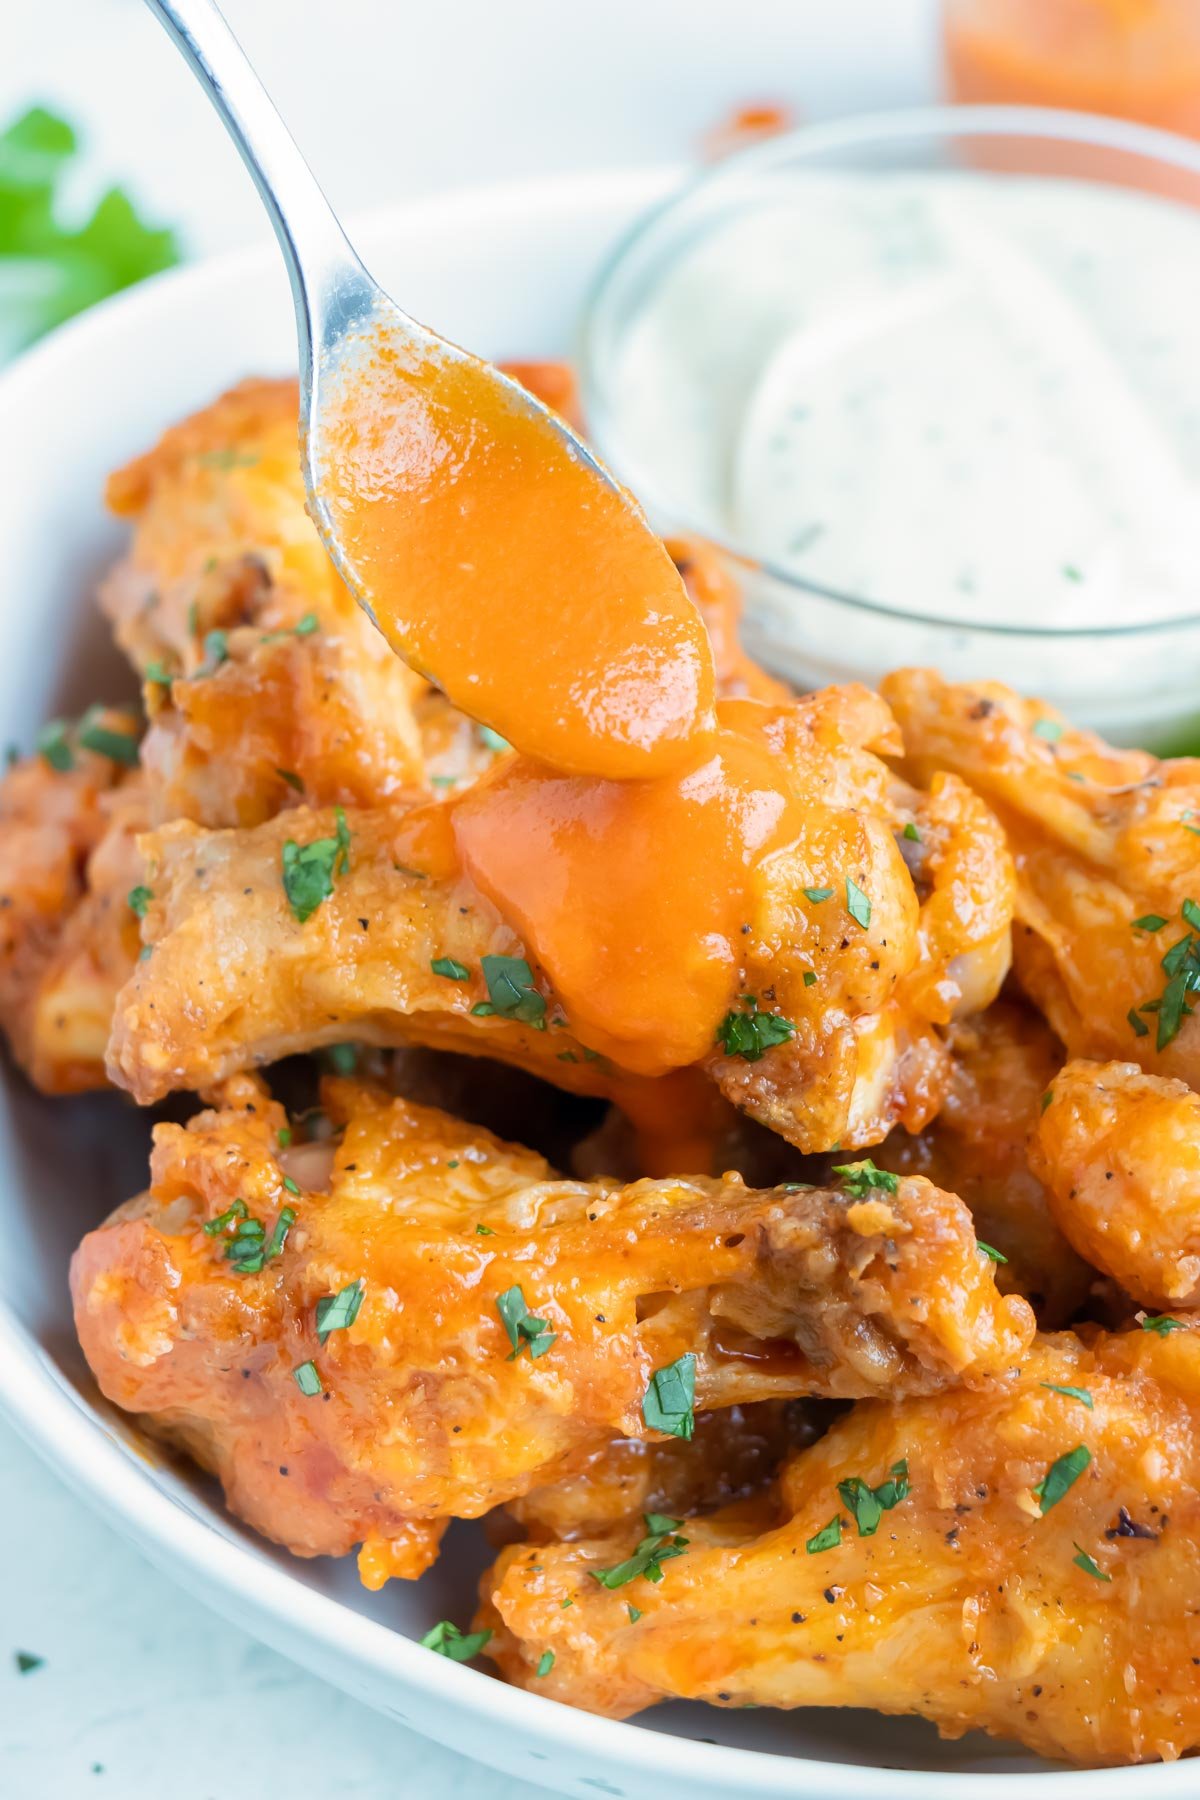 Buffalo sauce is poured on chicken wings.